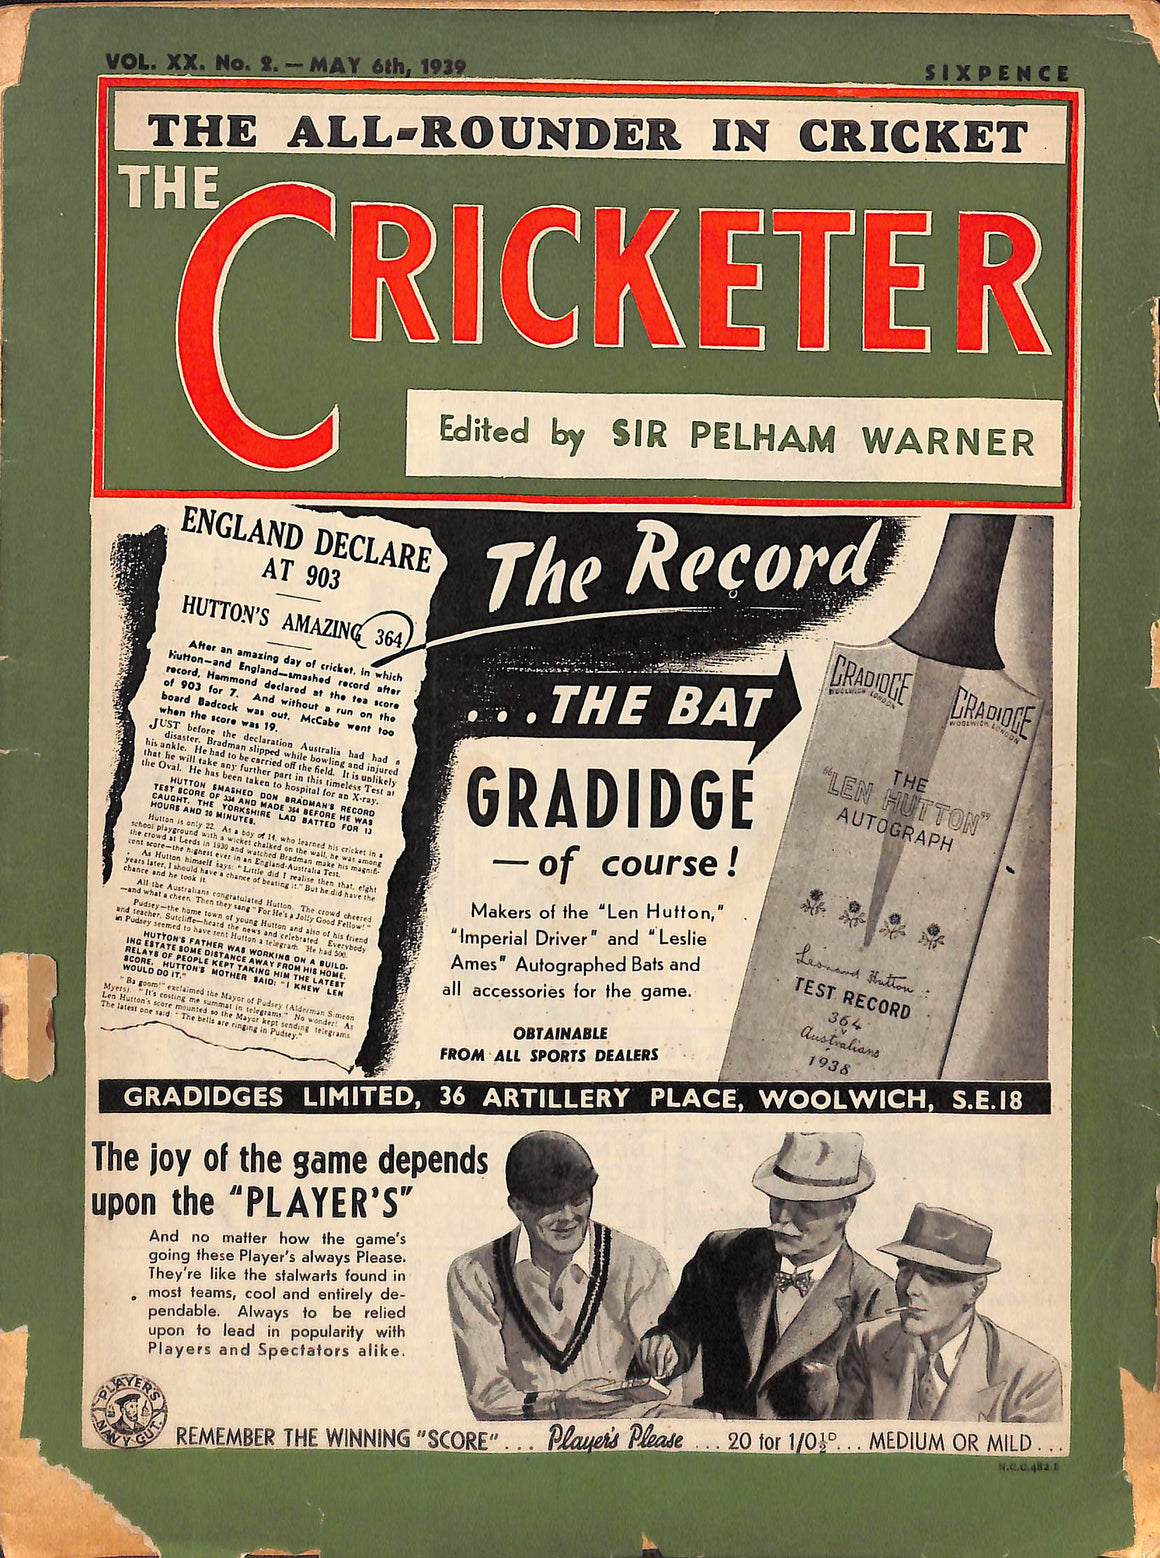 'The Cricketer - May 6th, 1939'